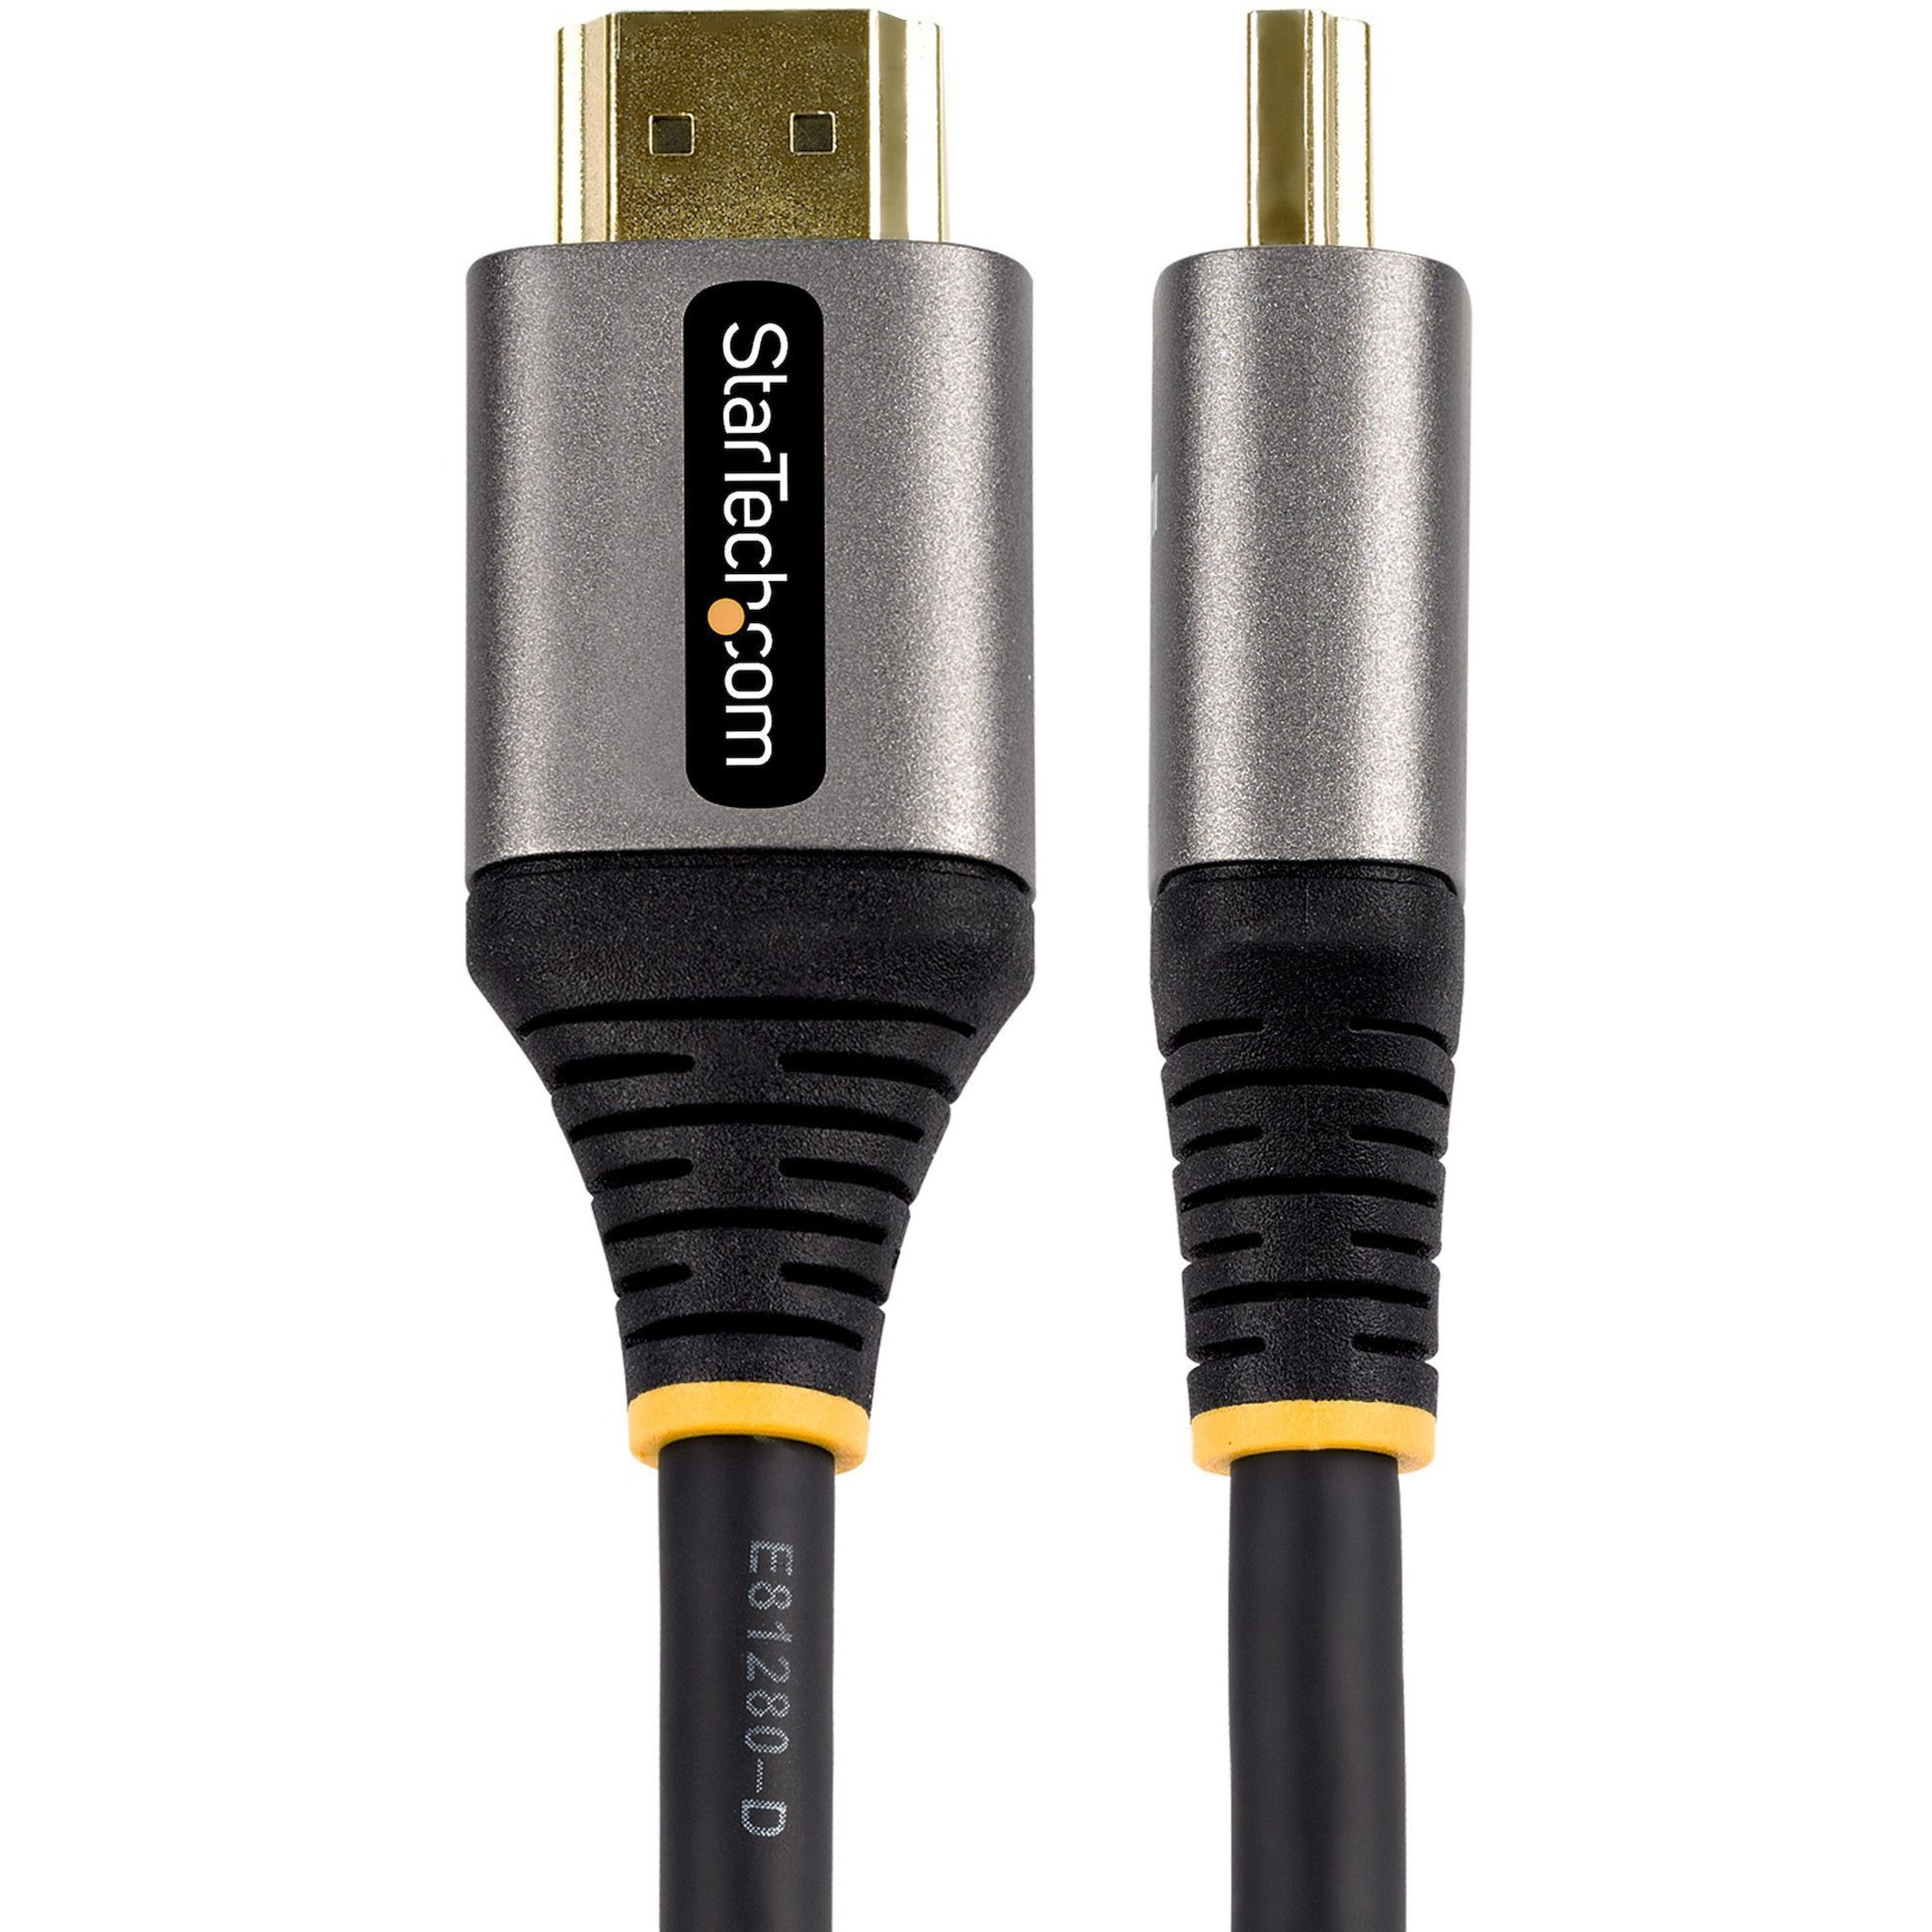 Startech .com 12ft (4m) HDMI 2.1 Cable, Certified Ultra High Speed HDMI  Cable 48Gbps, 8K 60Hz HDR10+, 8K HDMI Cord, TV/Monitor/Display4m/12f  HDMM21V4M - Corporate Armor